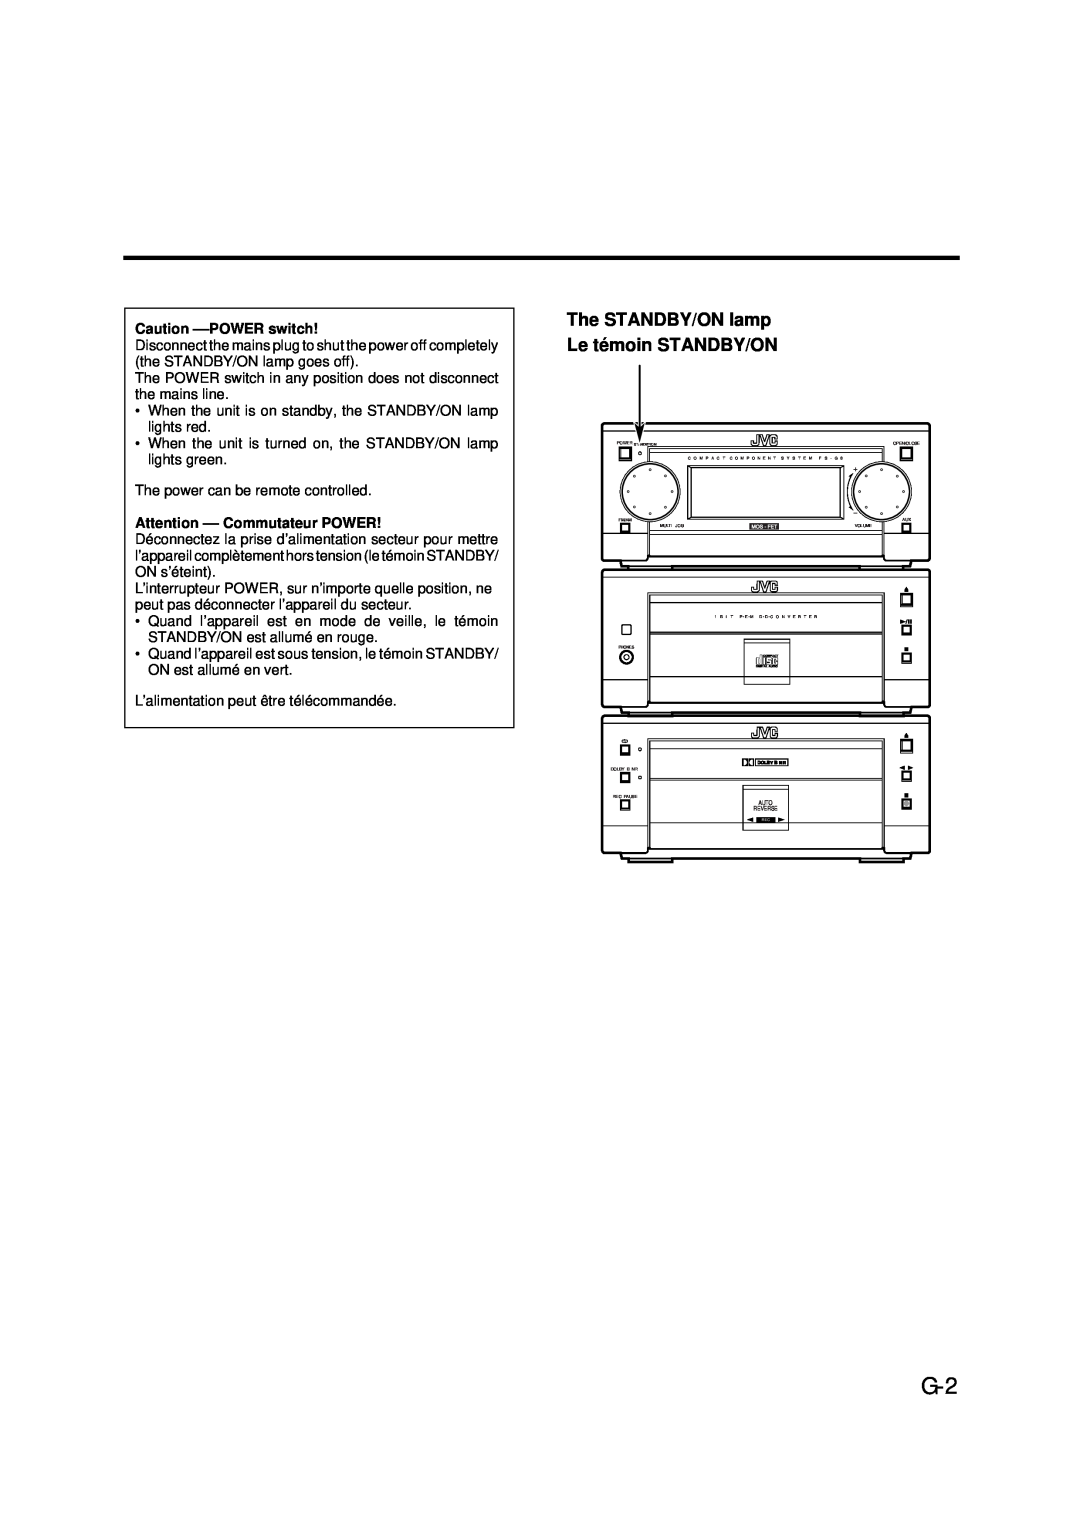 JVC LVT0375-001A, FS-G6 The STANDBY/ON lamp Le témoin STANDBY/ON, Caution --POWERswitch, Attention --Commutateur POWER 